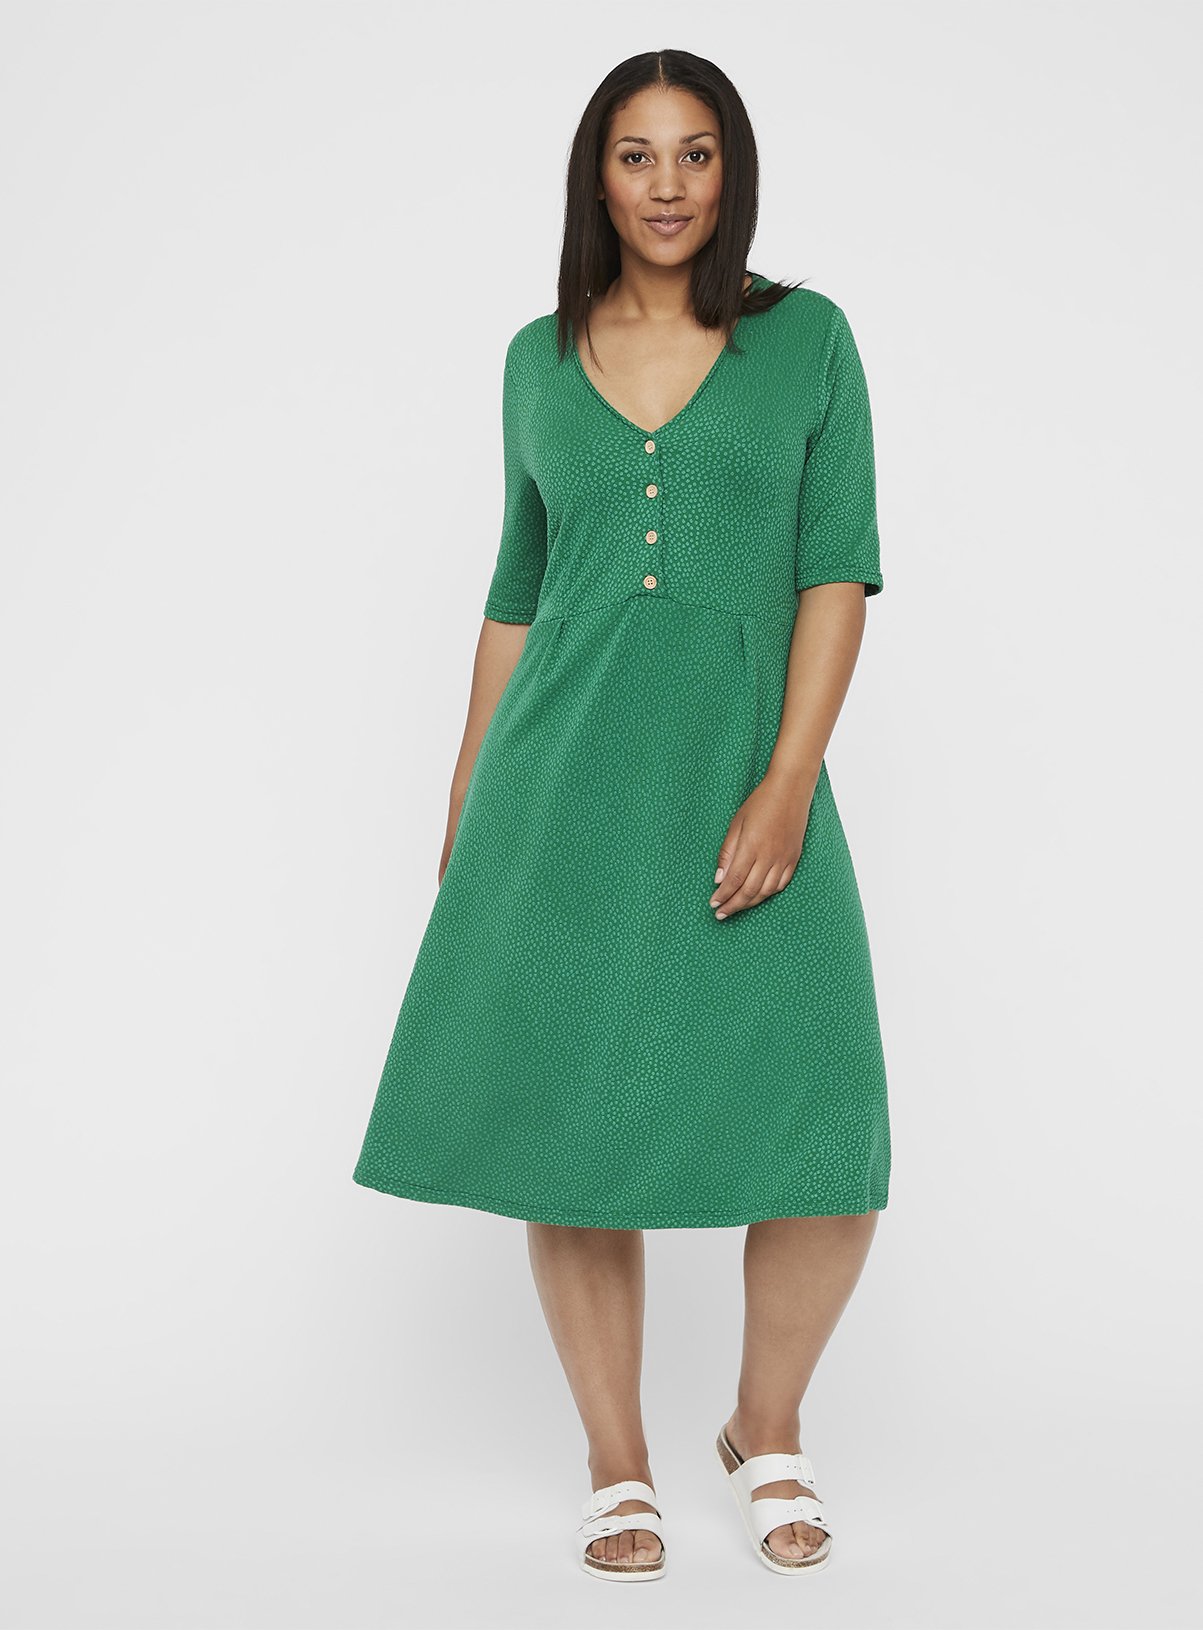 Green Jacquard Button Front Swing Dress Review